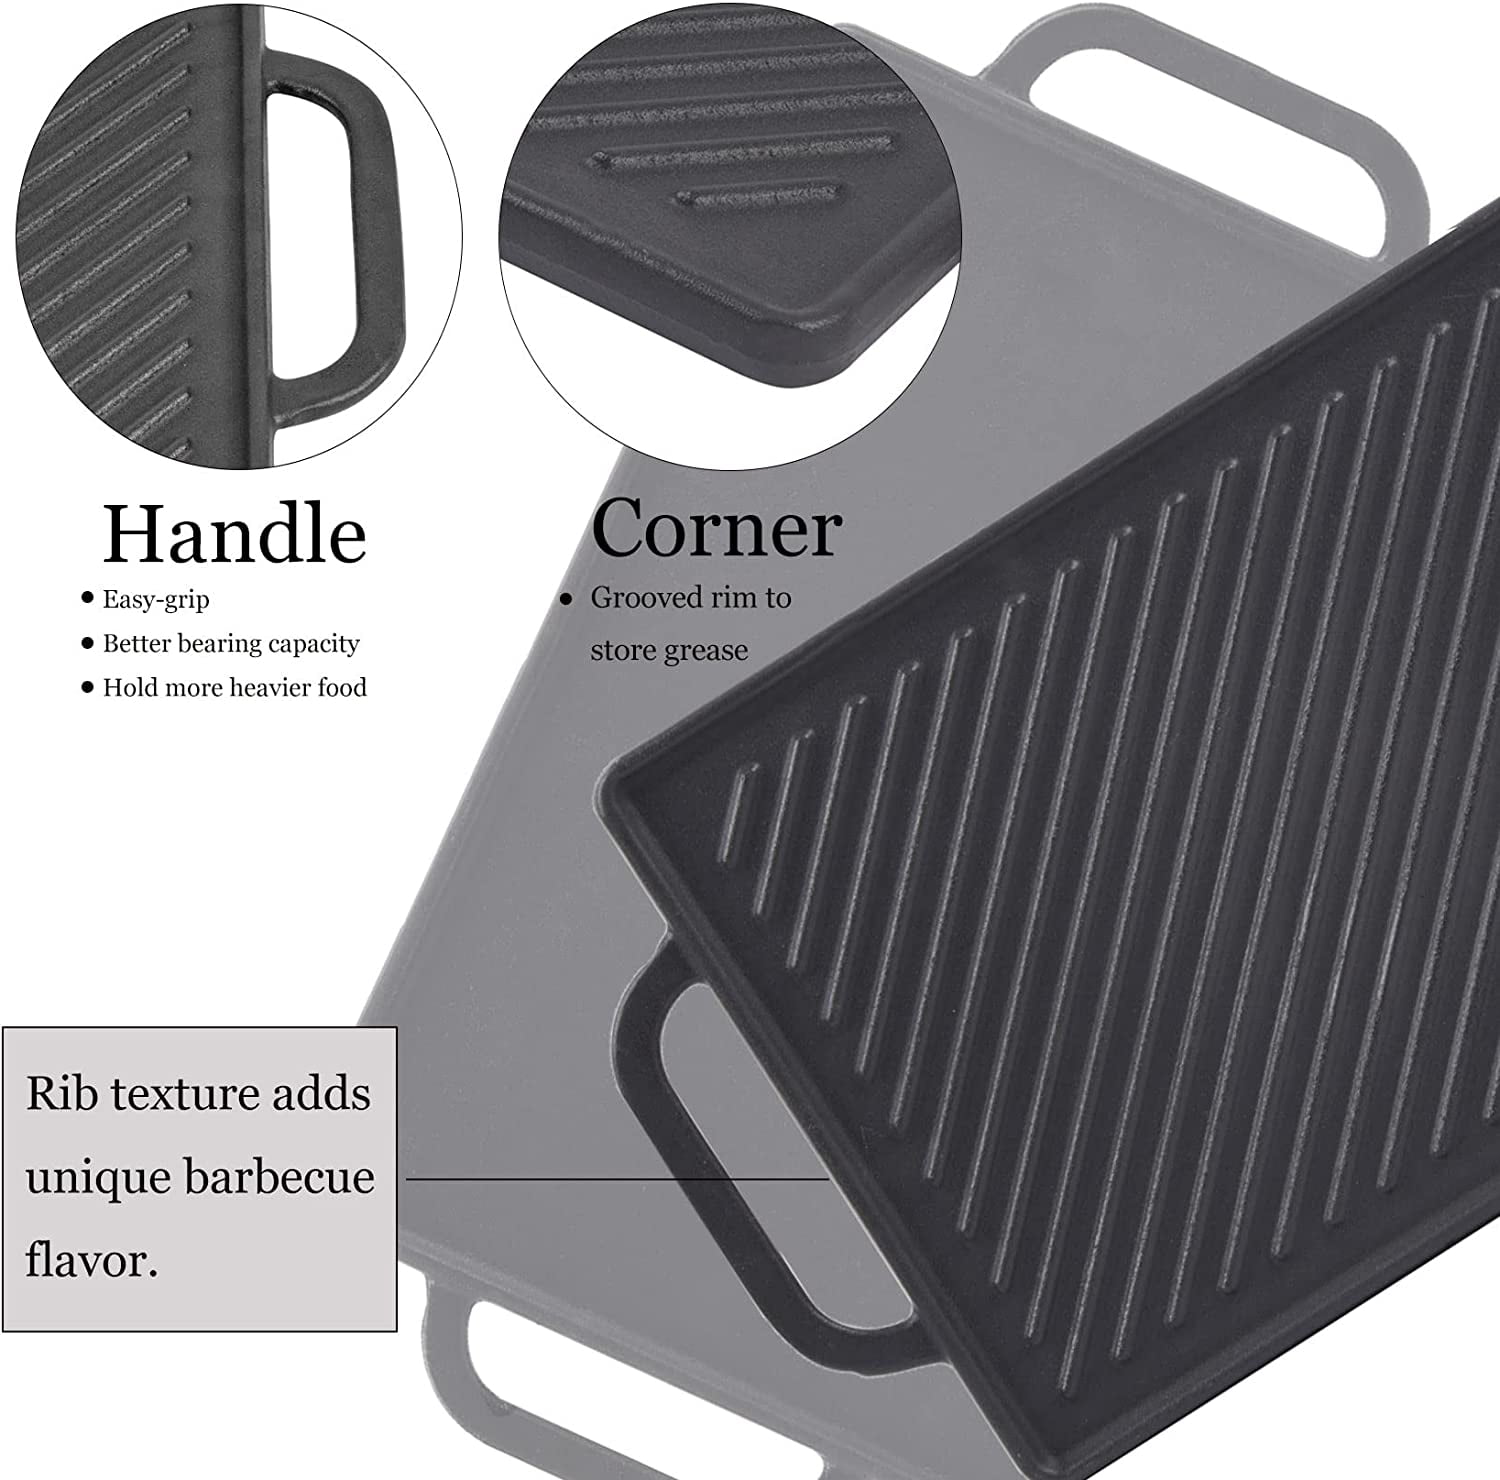 GasSaf Cast Iron Reversible Griddle, Double Sided Grill Pan Perfect for  Stove Tops and Gas Grills, 10 Inch x 10 Inch